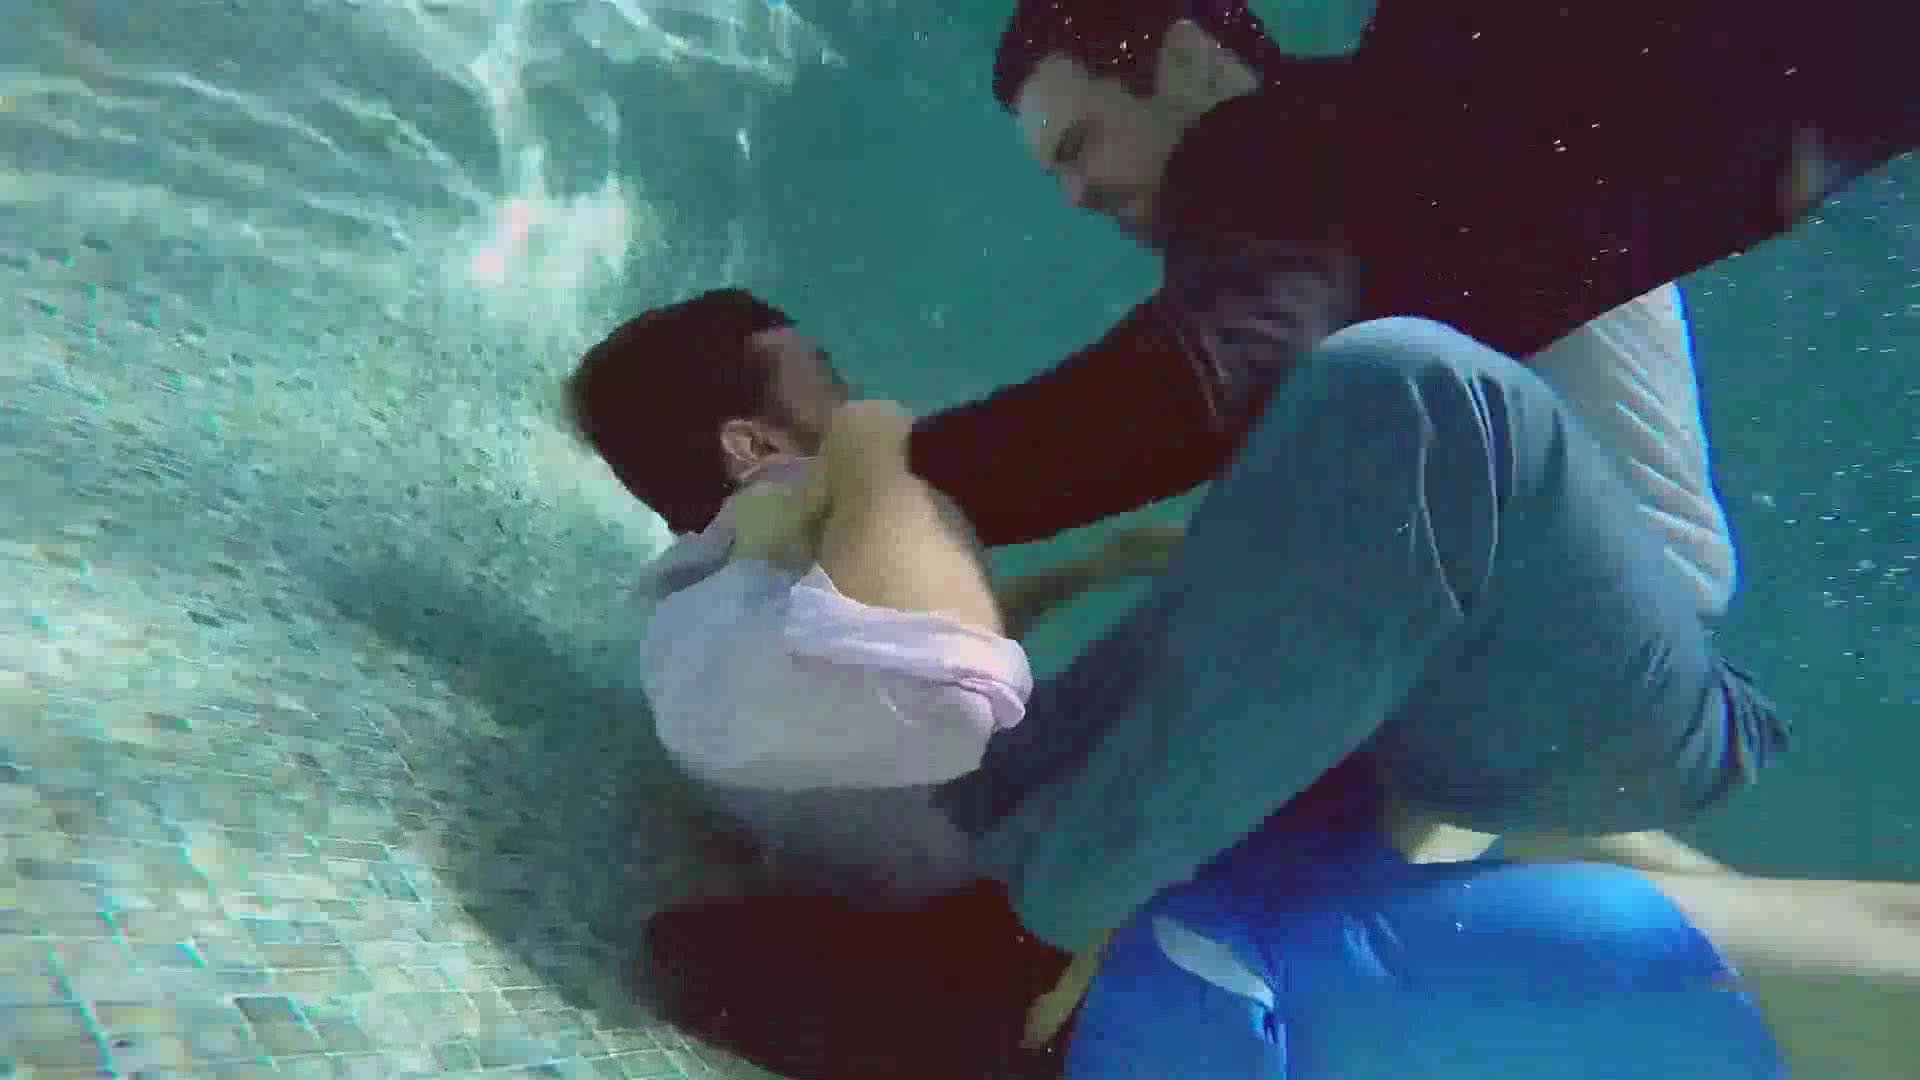 Underwater barefaced clothed fight